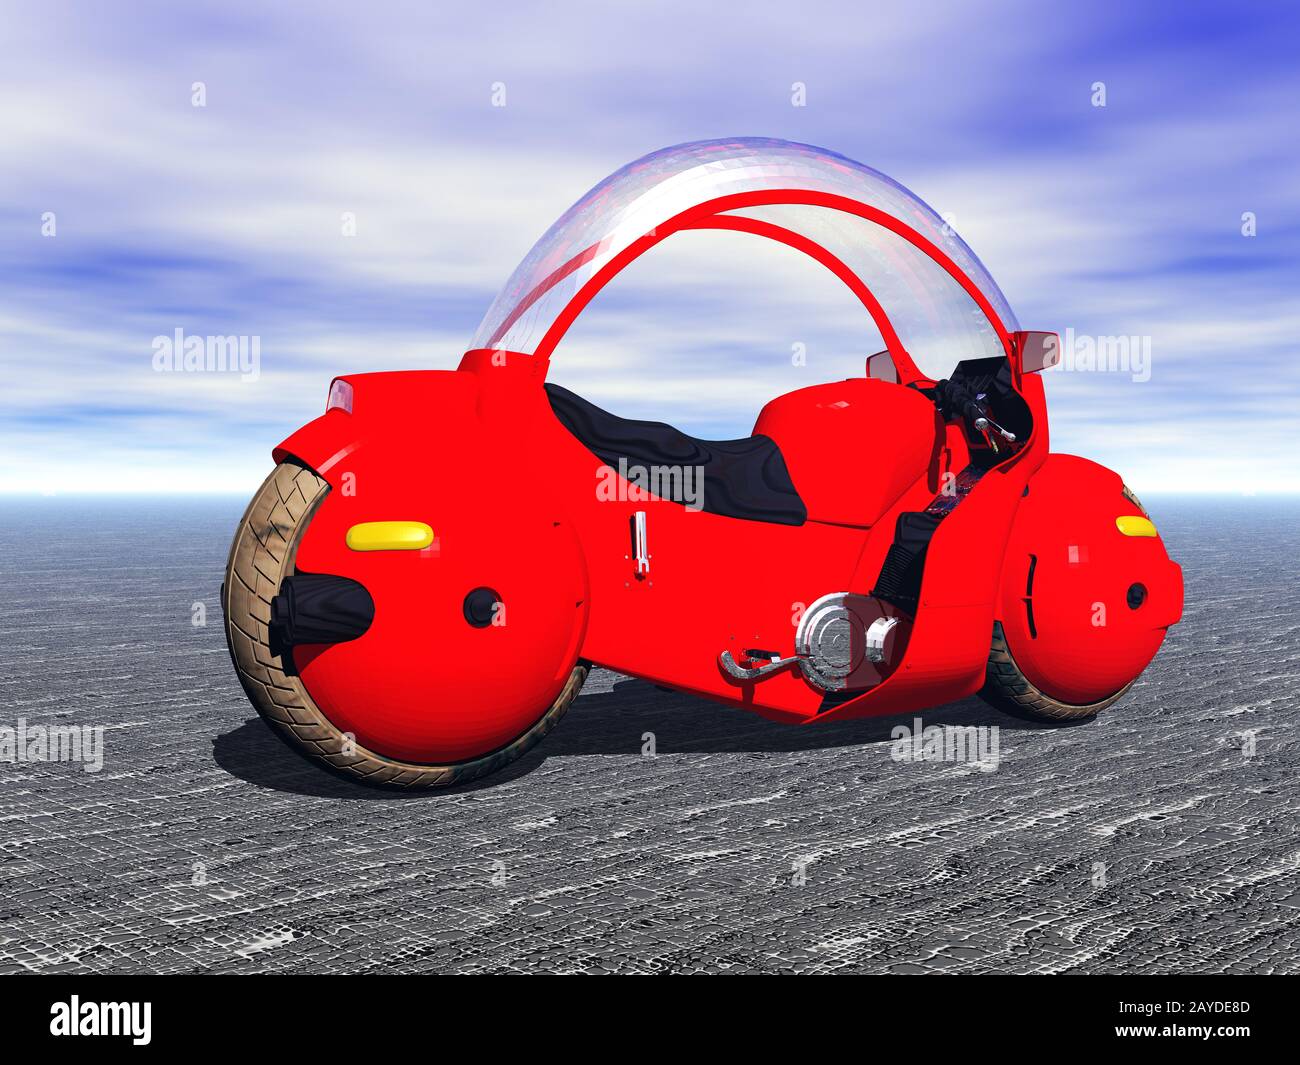 red futuristic motorcycle Stock Photo